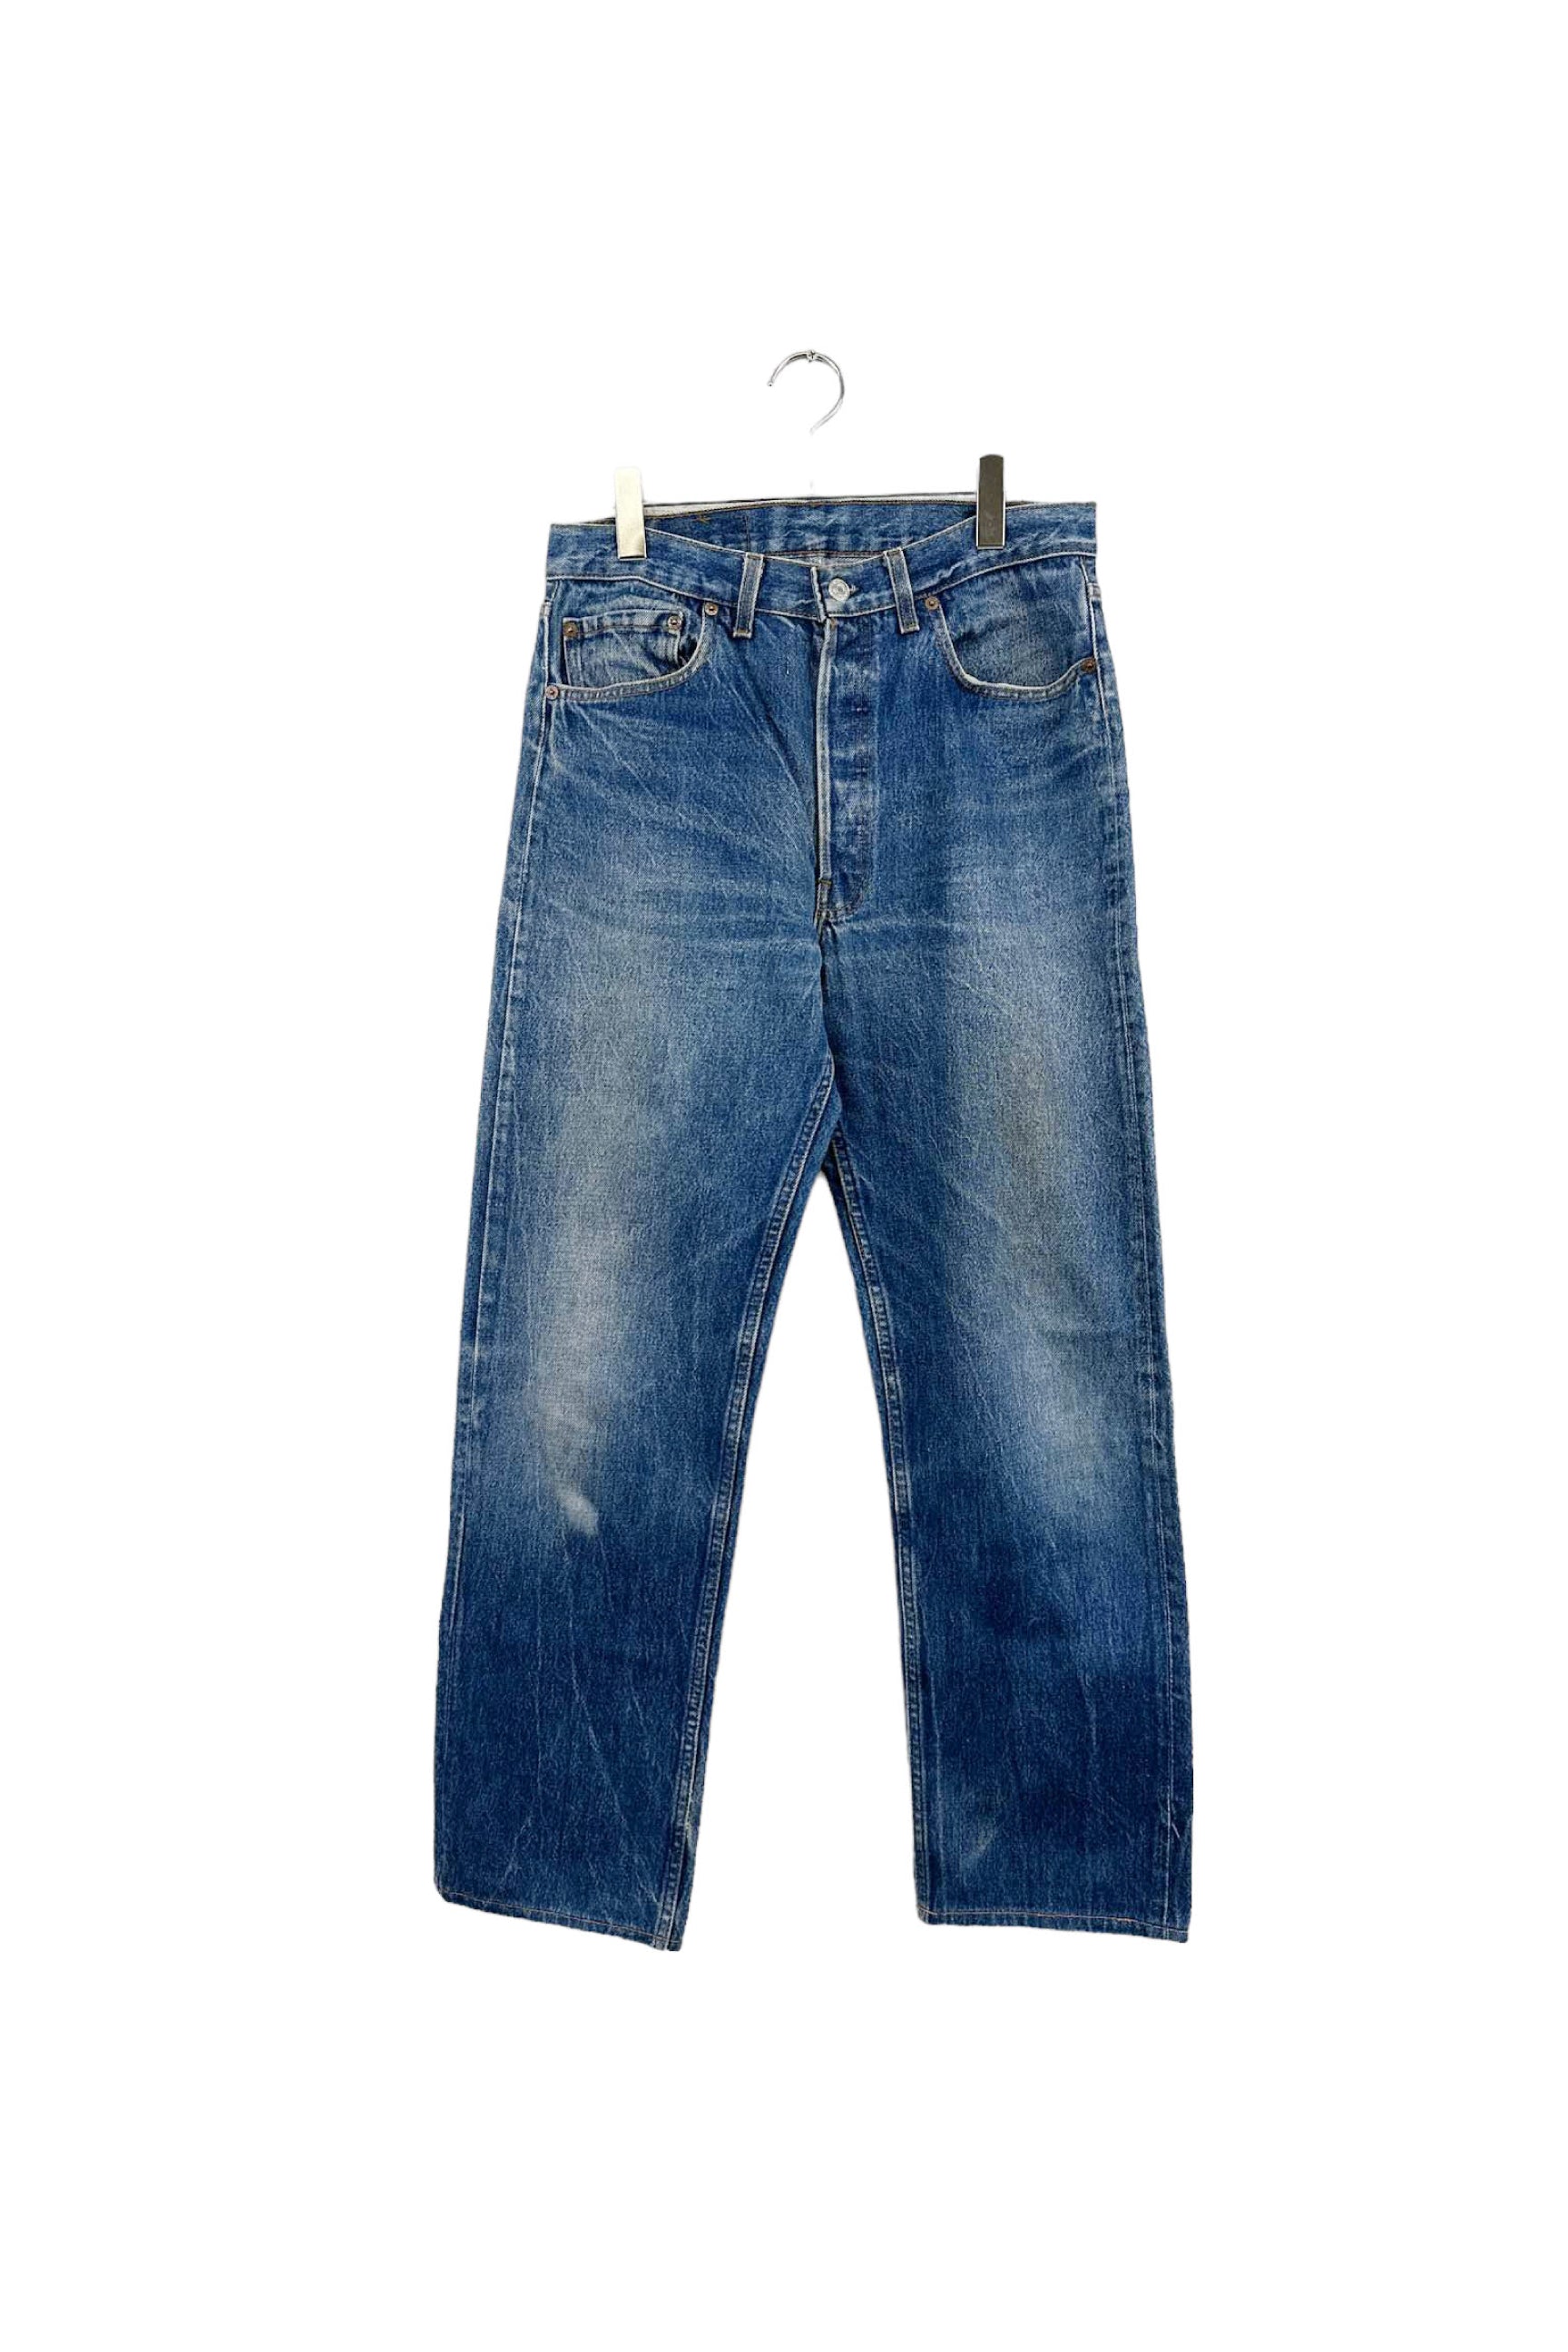 80's Made in USA Levi's 501 0115 denim pants – ReSCOUNT STORE